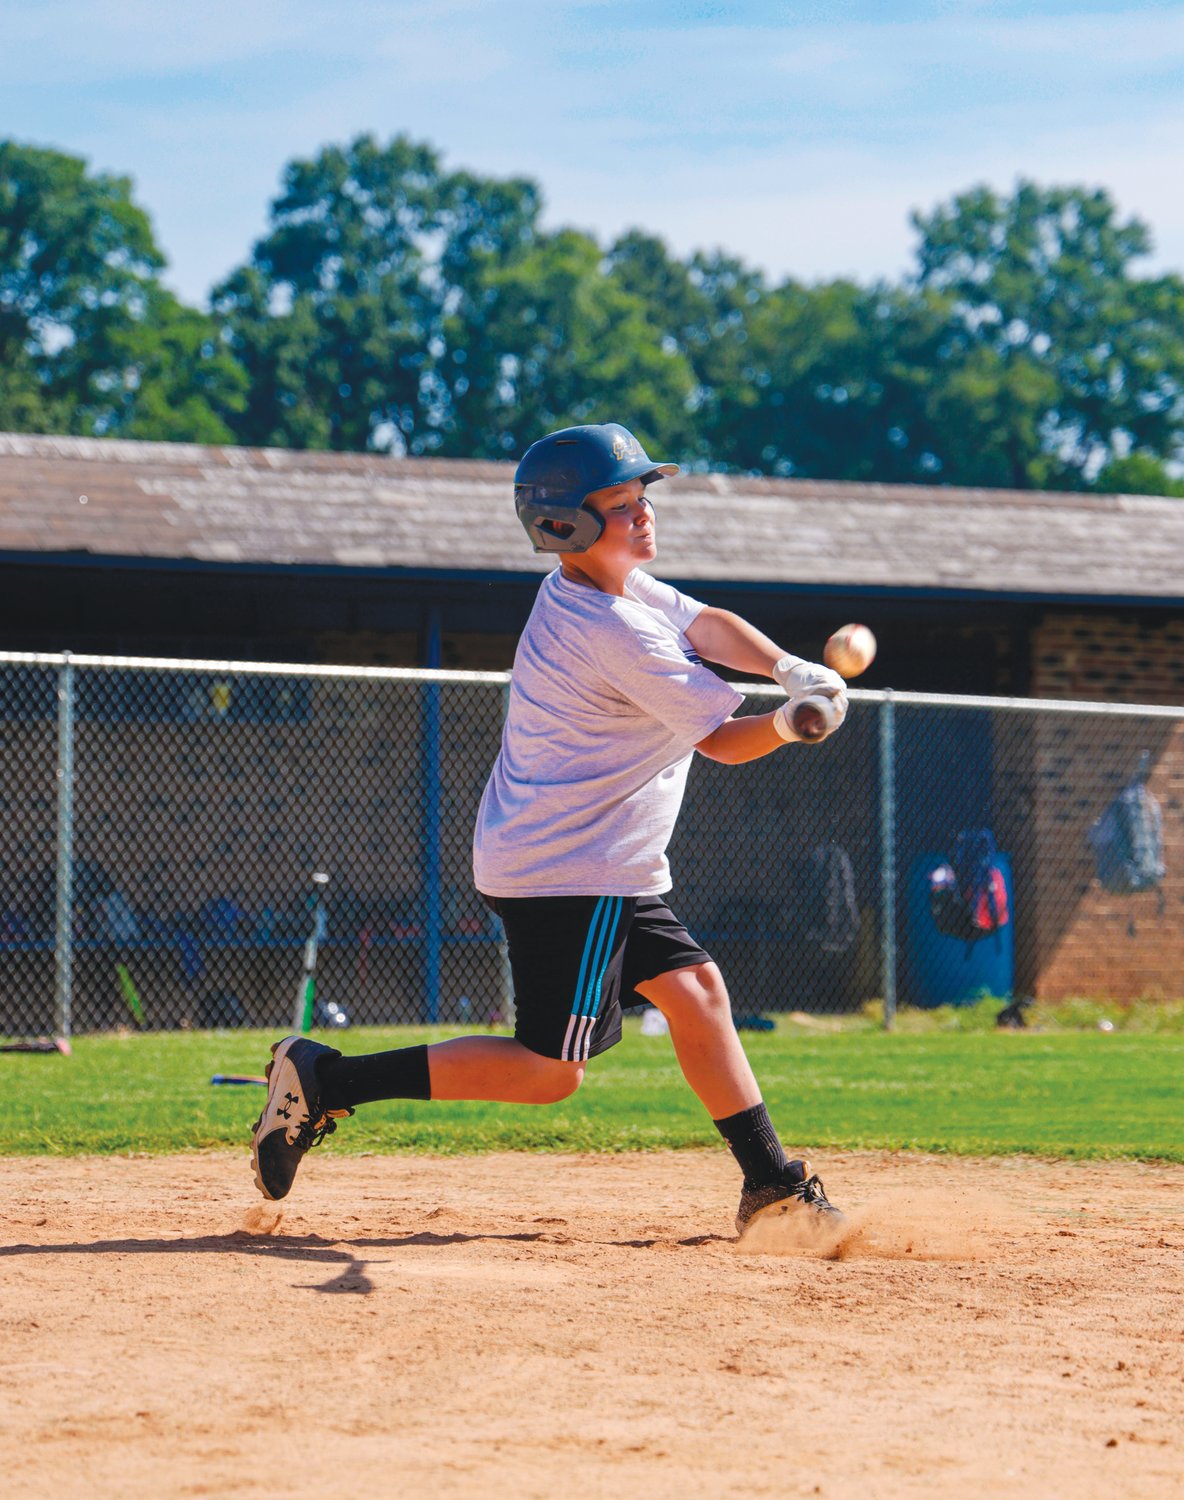 Jackson, a camper at Jordan-Matthews' annual baseball camp, swings at a pitch during the scrimmage portion of camp.